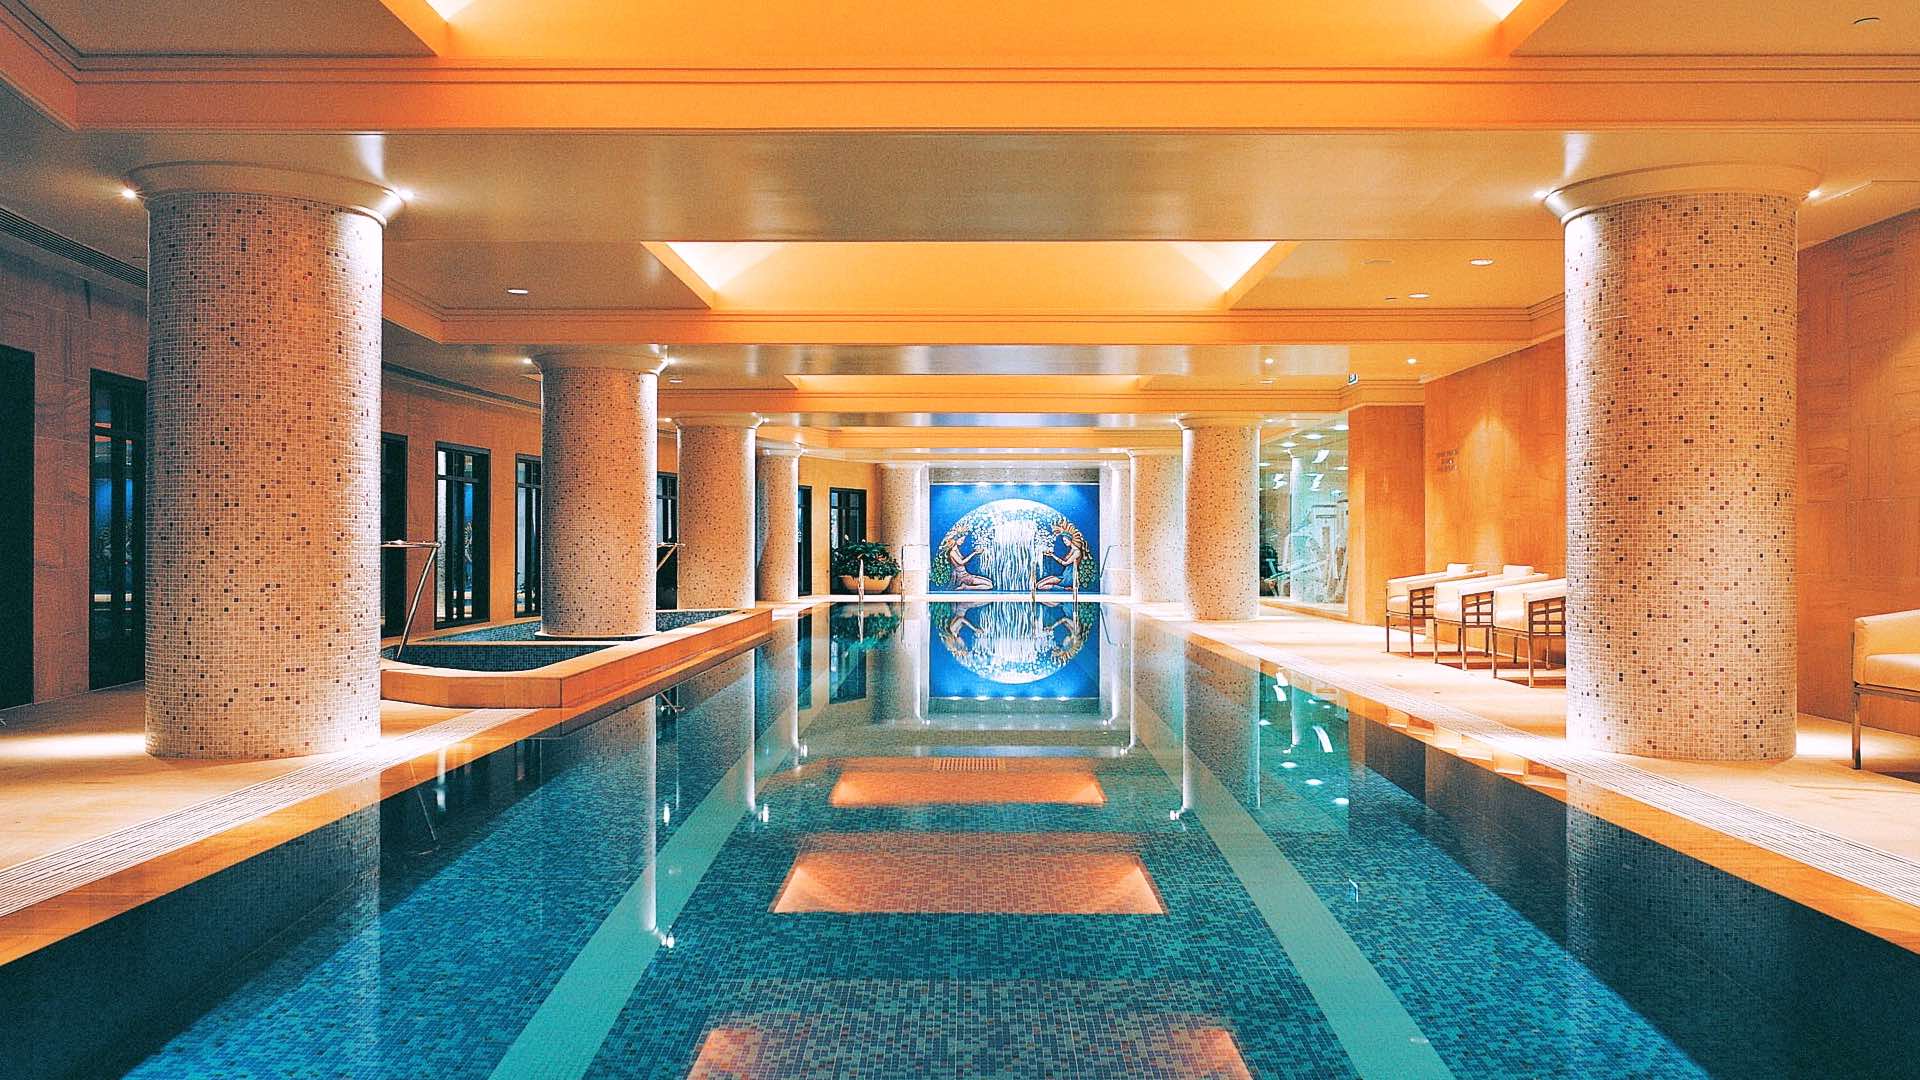 The indoor pool at Park Hyatt - home to one of the best spas in Melbourne